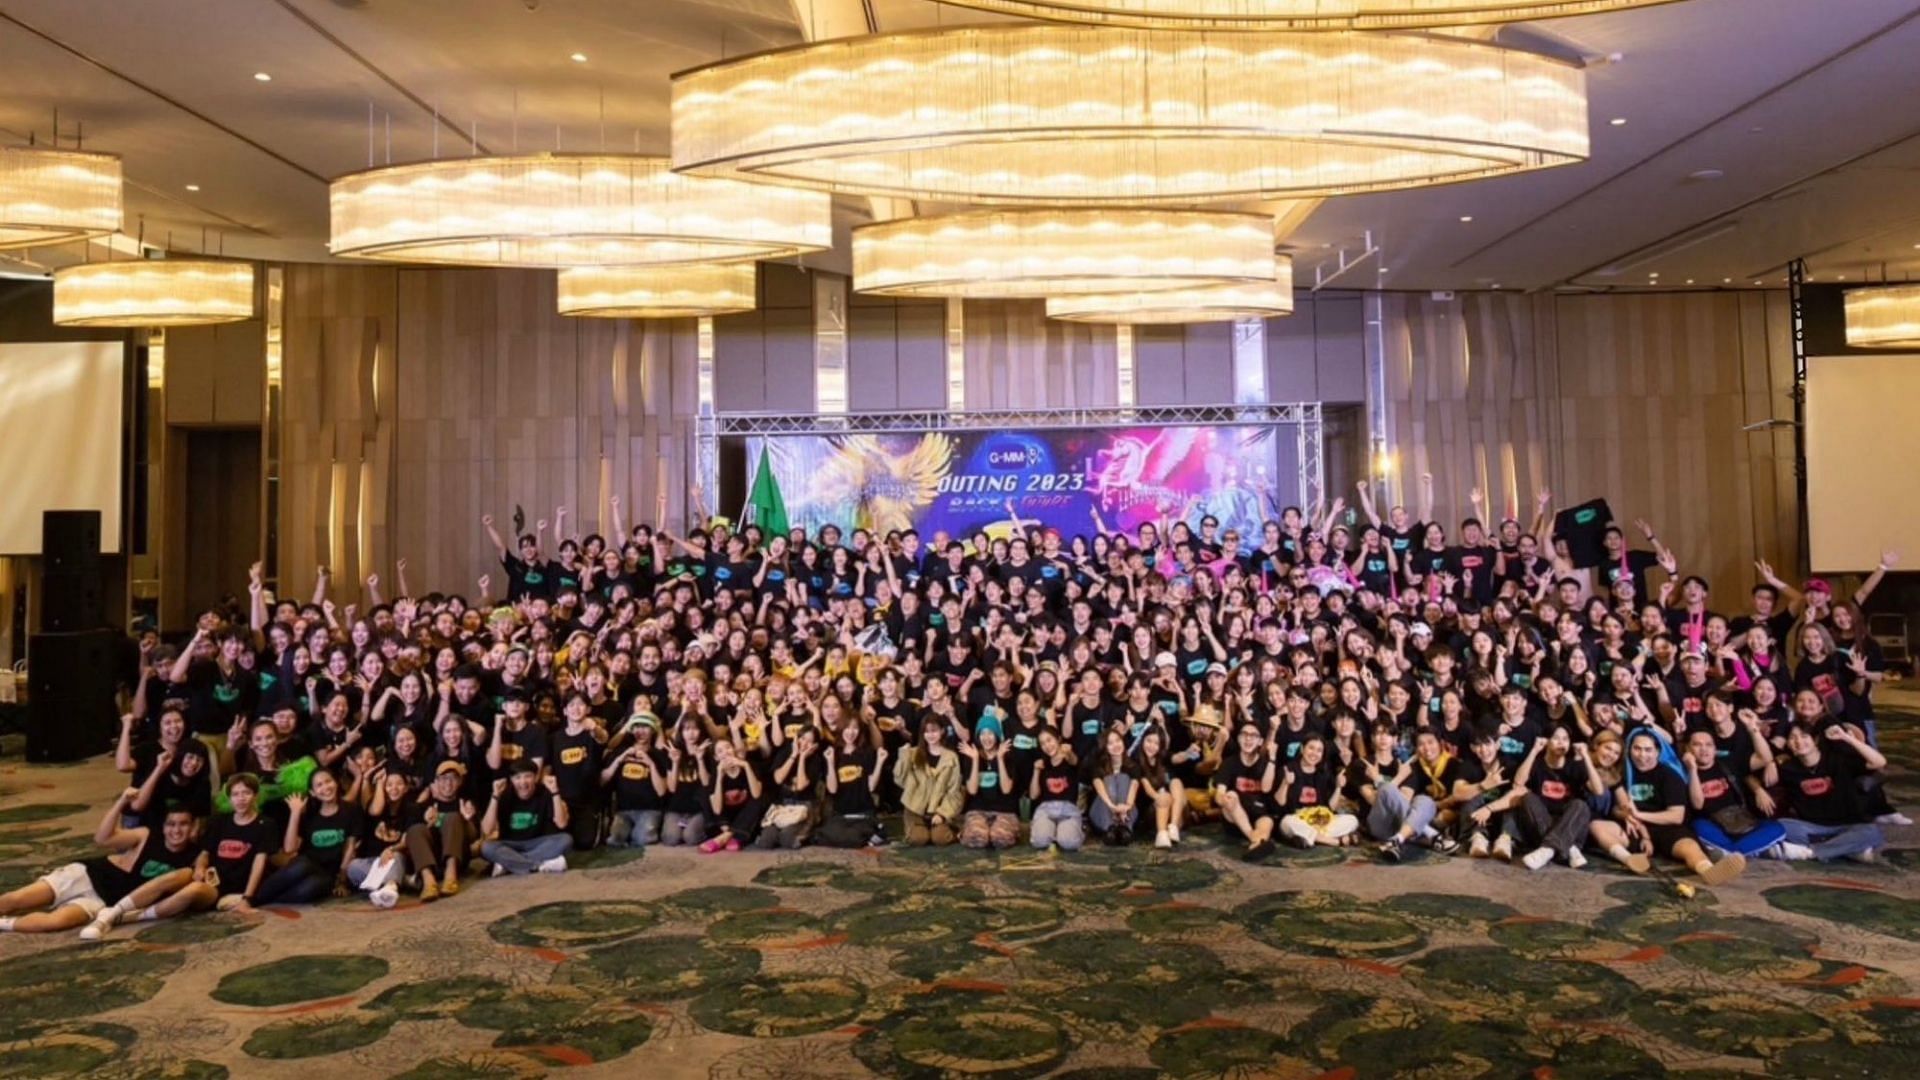 Group picture of the people at the GMMTV Outing 2023 (Image via Instagram/filmpawis)